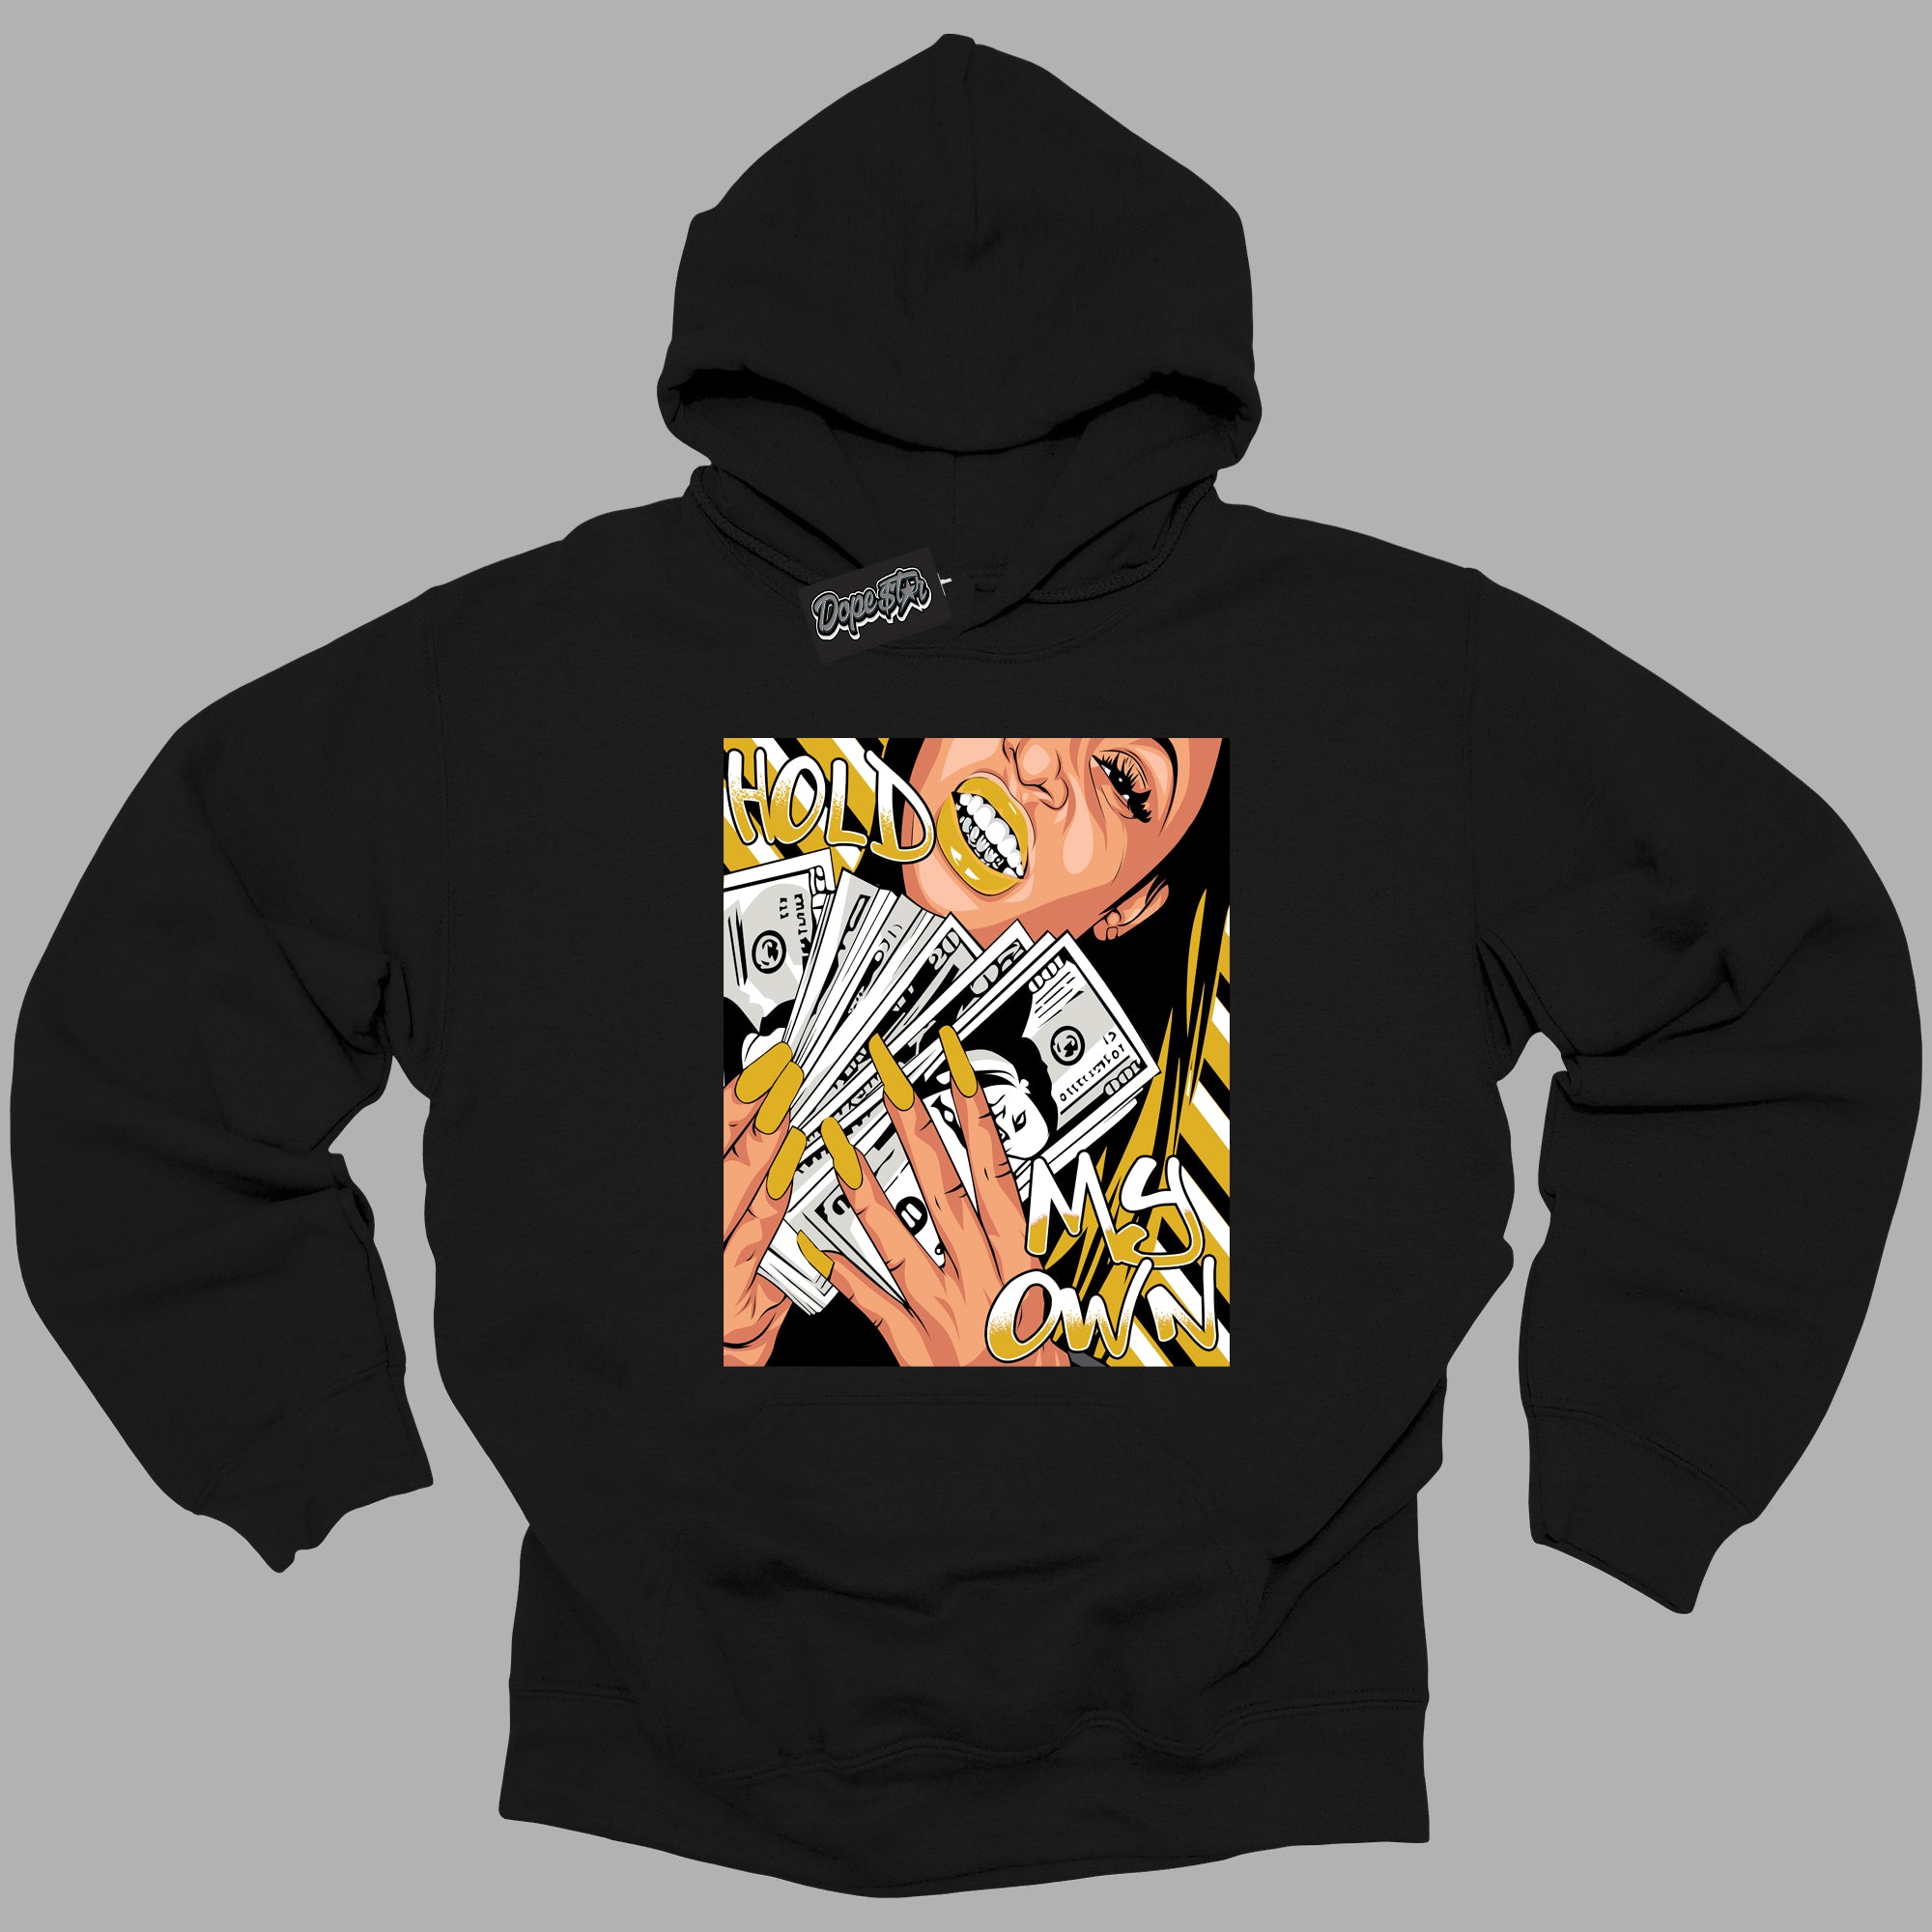 Cool Black Hoodie with “ Hold My Own ”  design that Perfectly Matches Yellow Ochre 6s Sneakers.